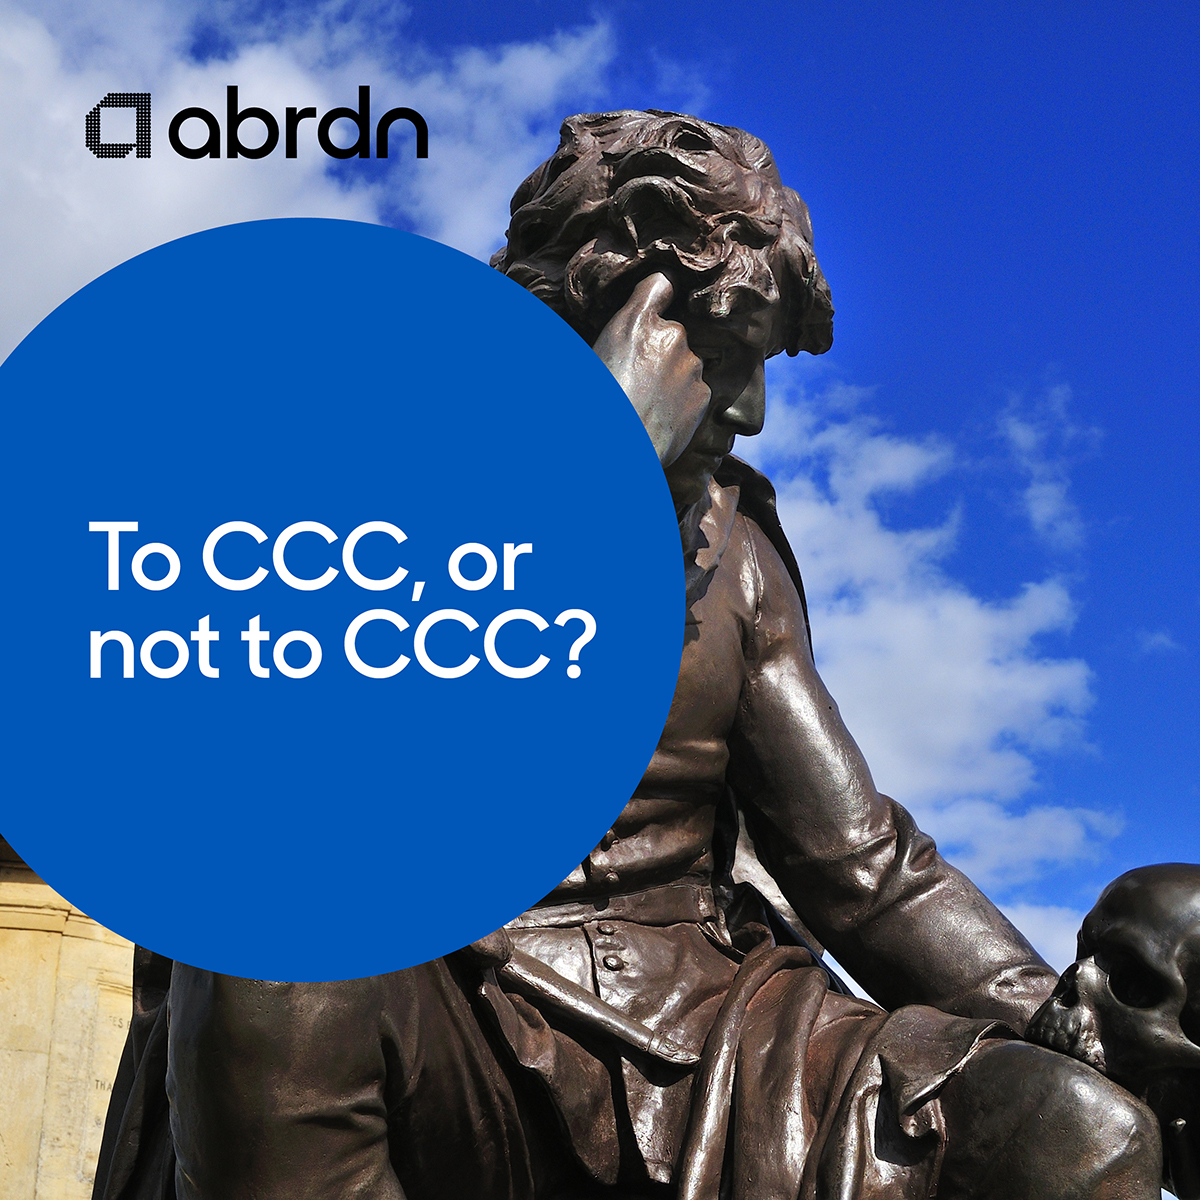 To CCC, or not to CCC? That is the question, isn’t it? With rate cuts on the horizon, a look at what’s next for US high yield bonds. Read details on this here: ow.ly/BGMV50Rrbni #abrdnInsights #FixedIncome